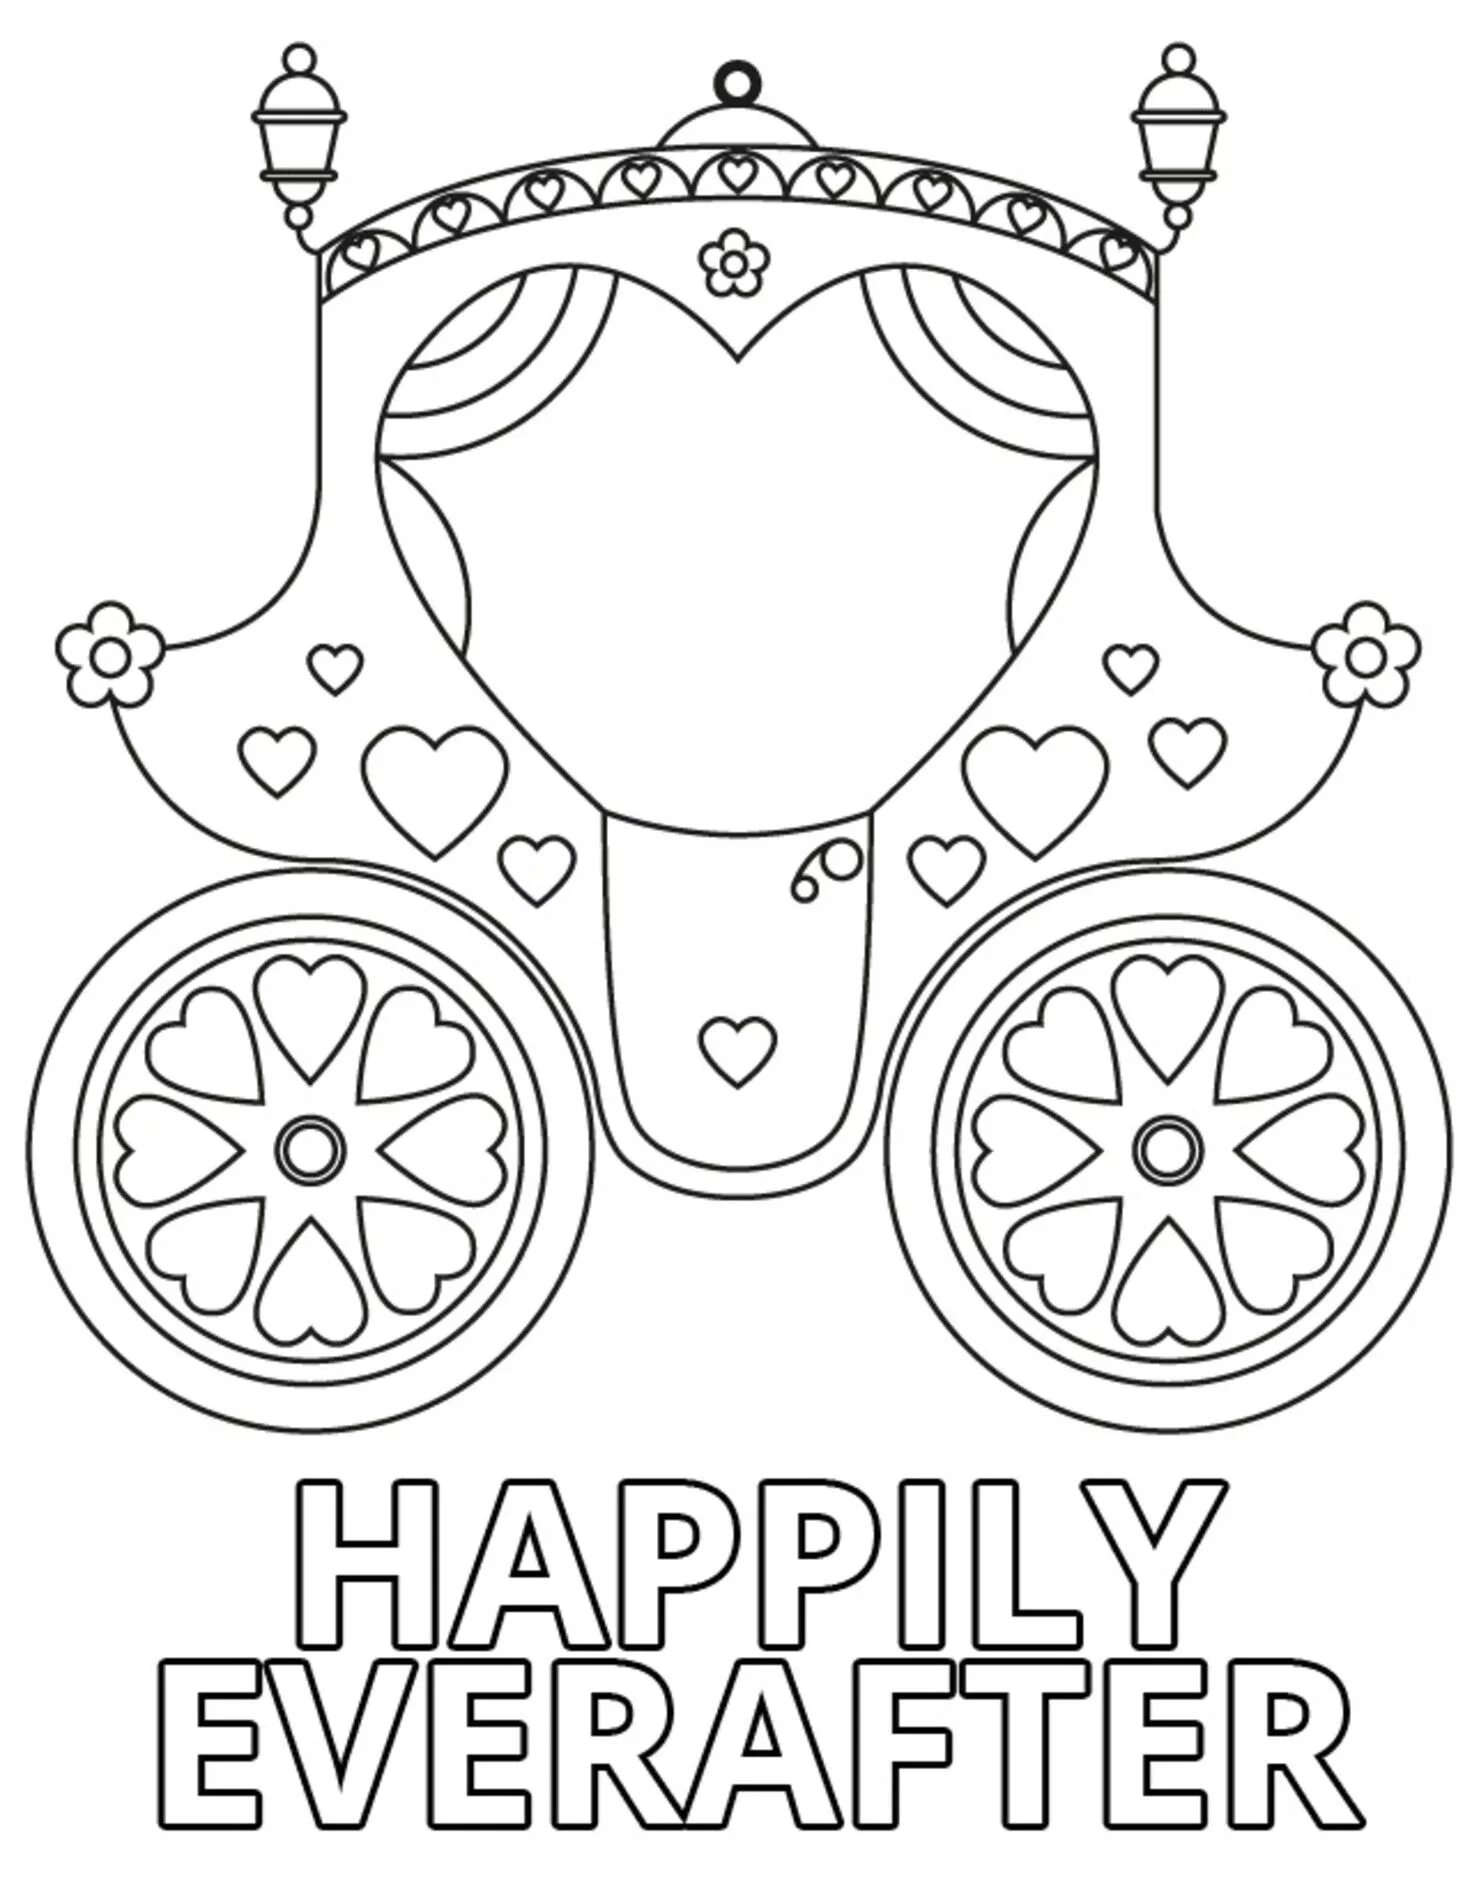 Fancy carriage coloring book for kids